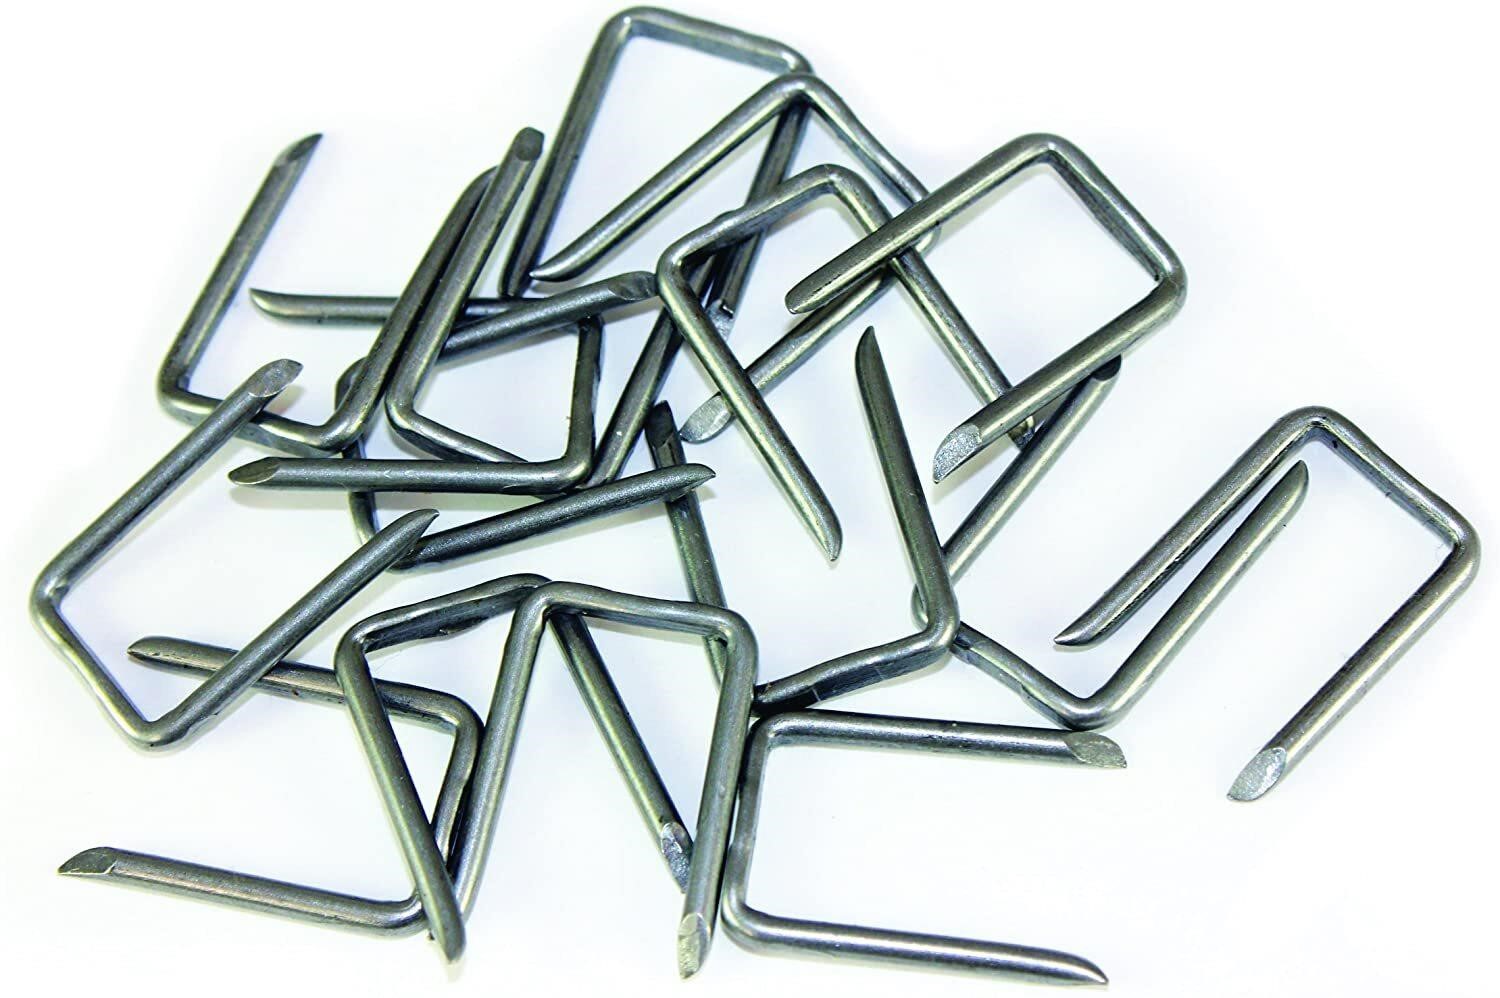 Southwire 1/2-in Metal Staples 5000 Pack